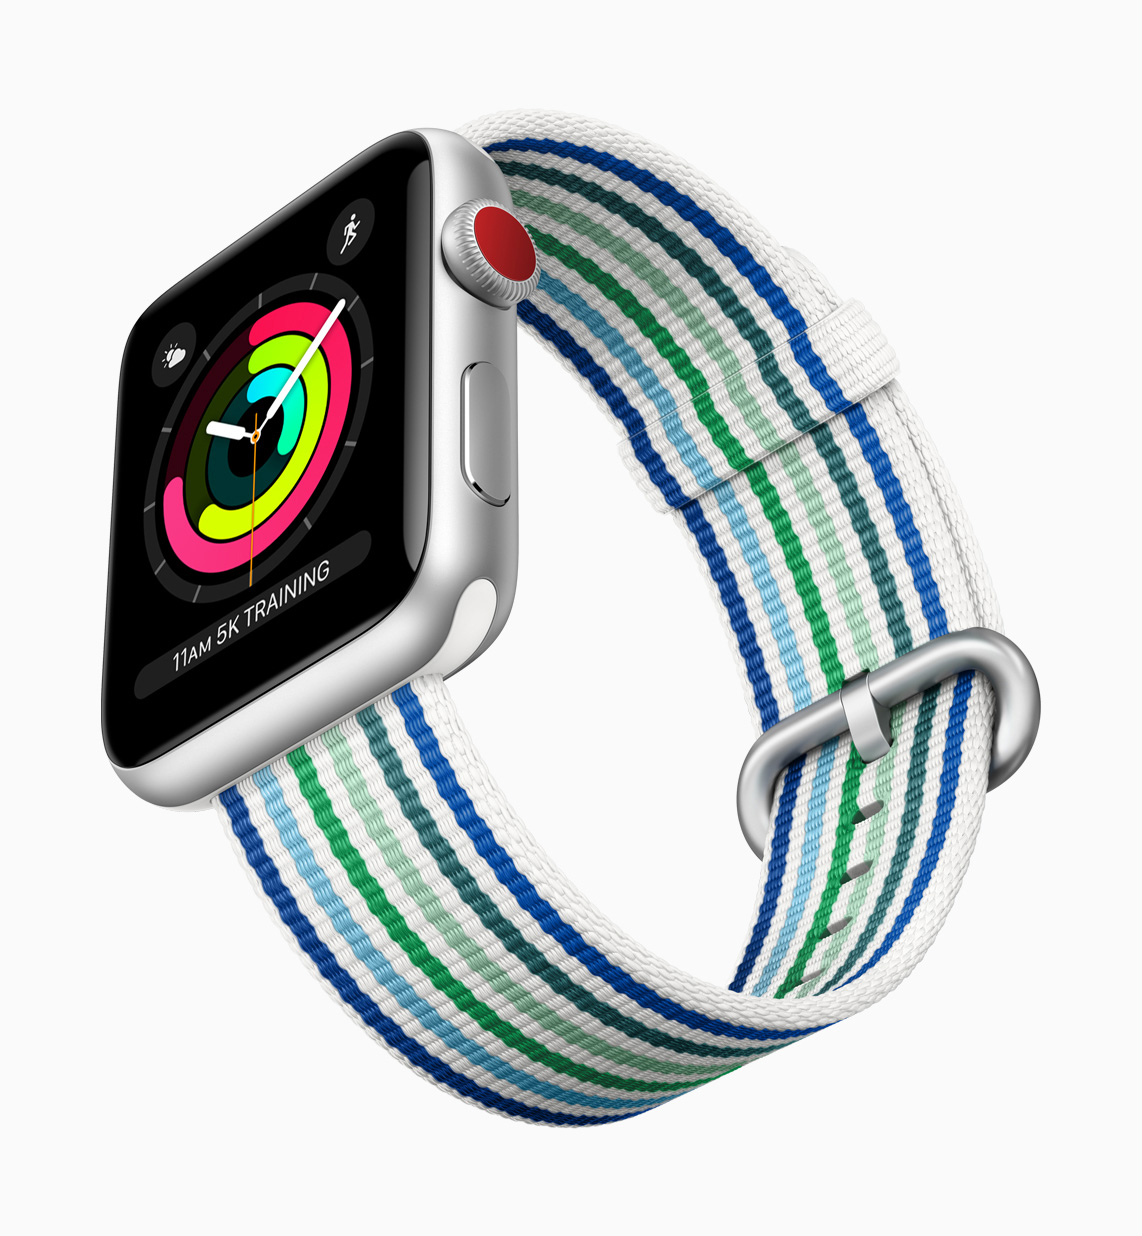 New Apple Watch bands feature spring colors and styles Apple